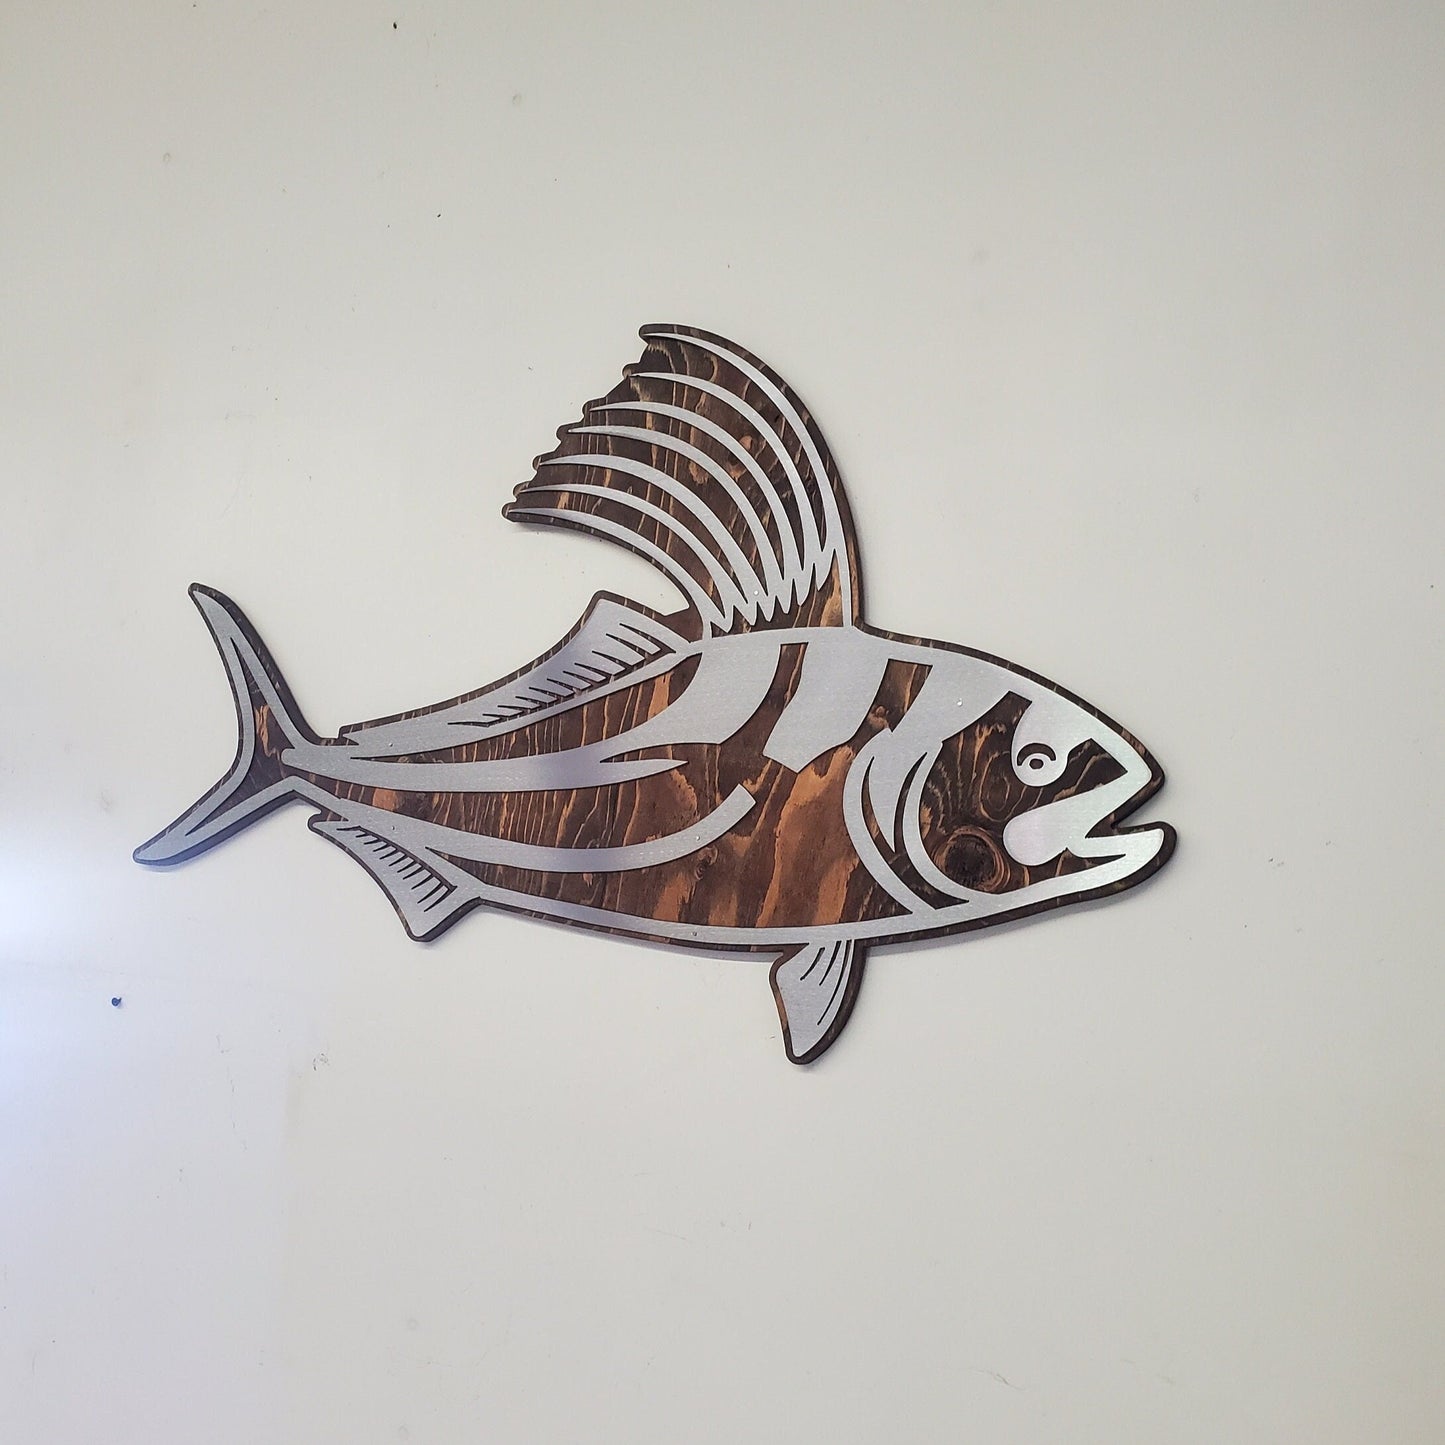 Rooster Fish Metal Art on Wood